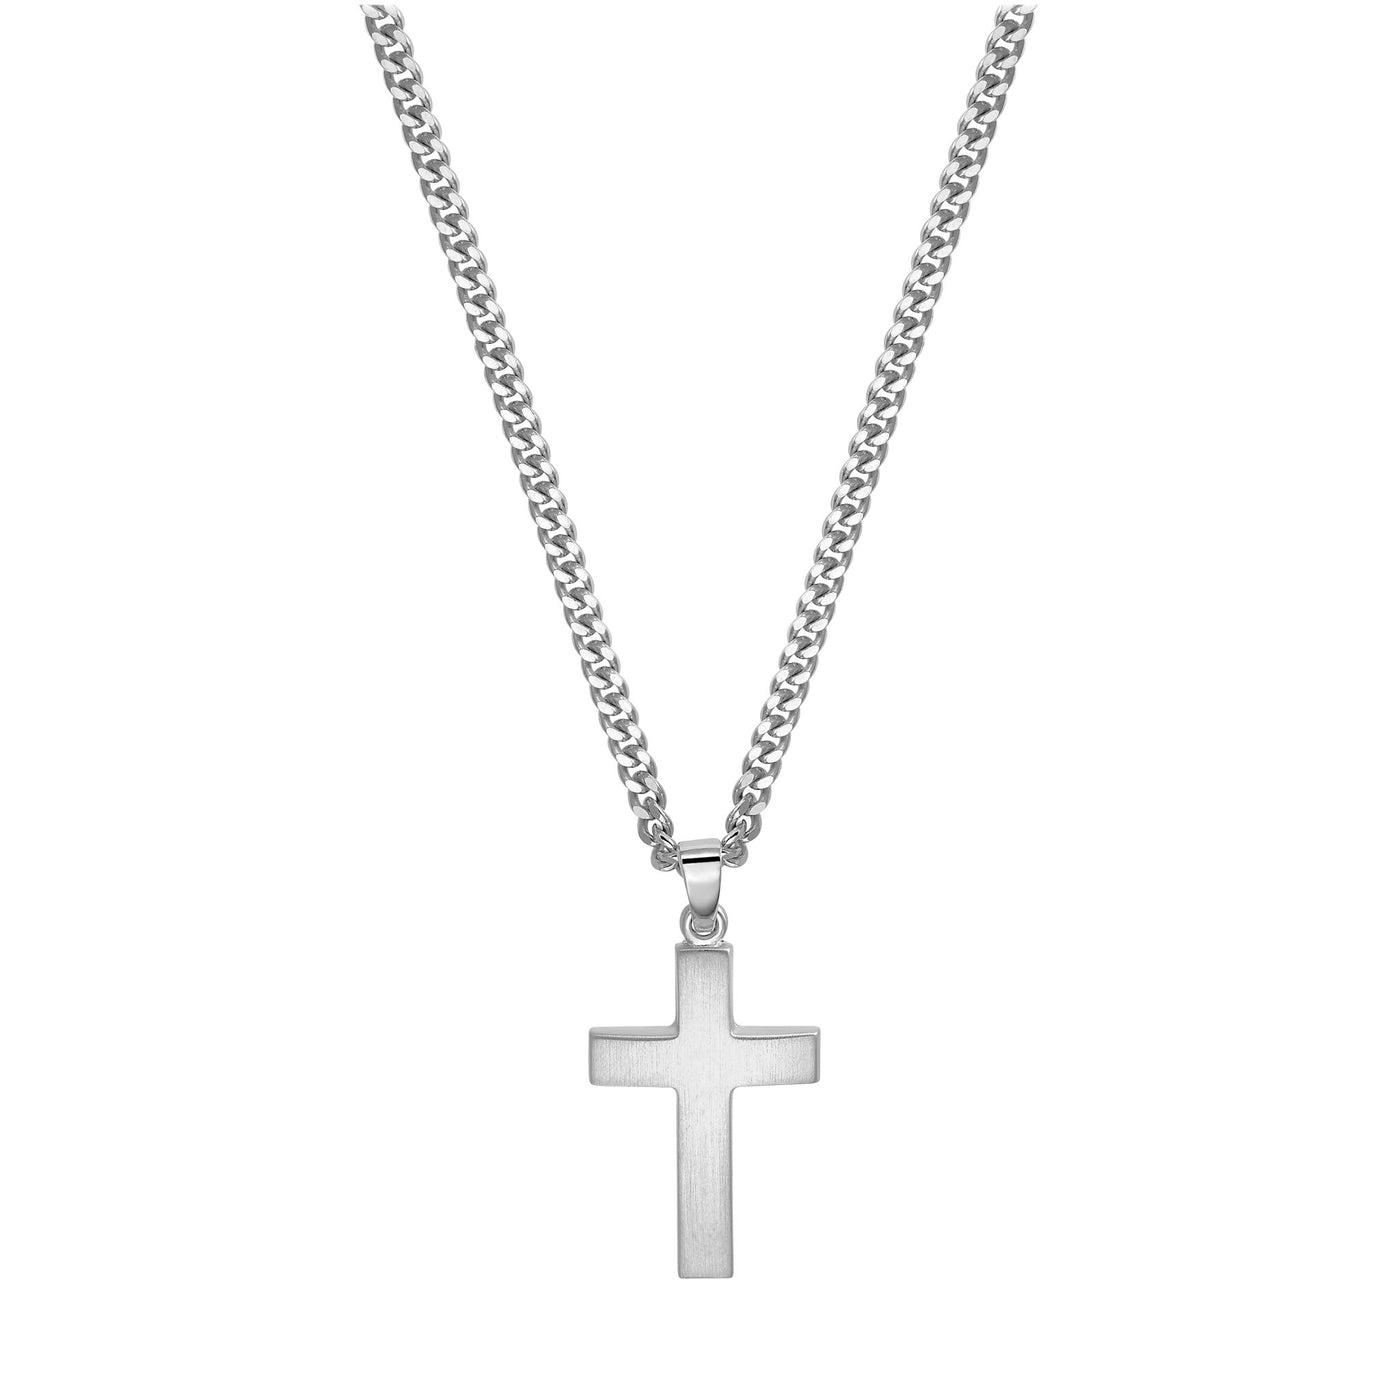 CROSS NECKLACE FROSTED 925 SILVER RHODIUM PLATED - IDENTIM®